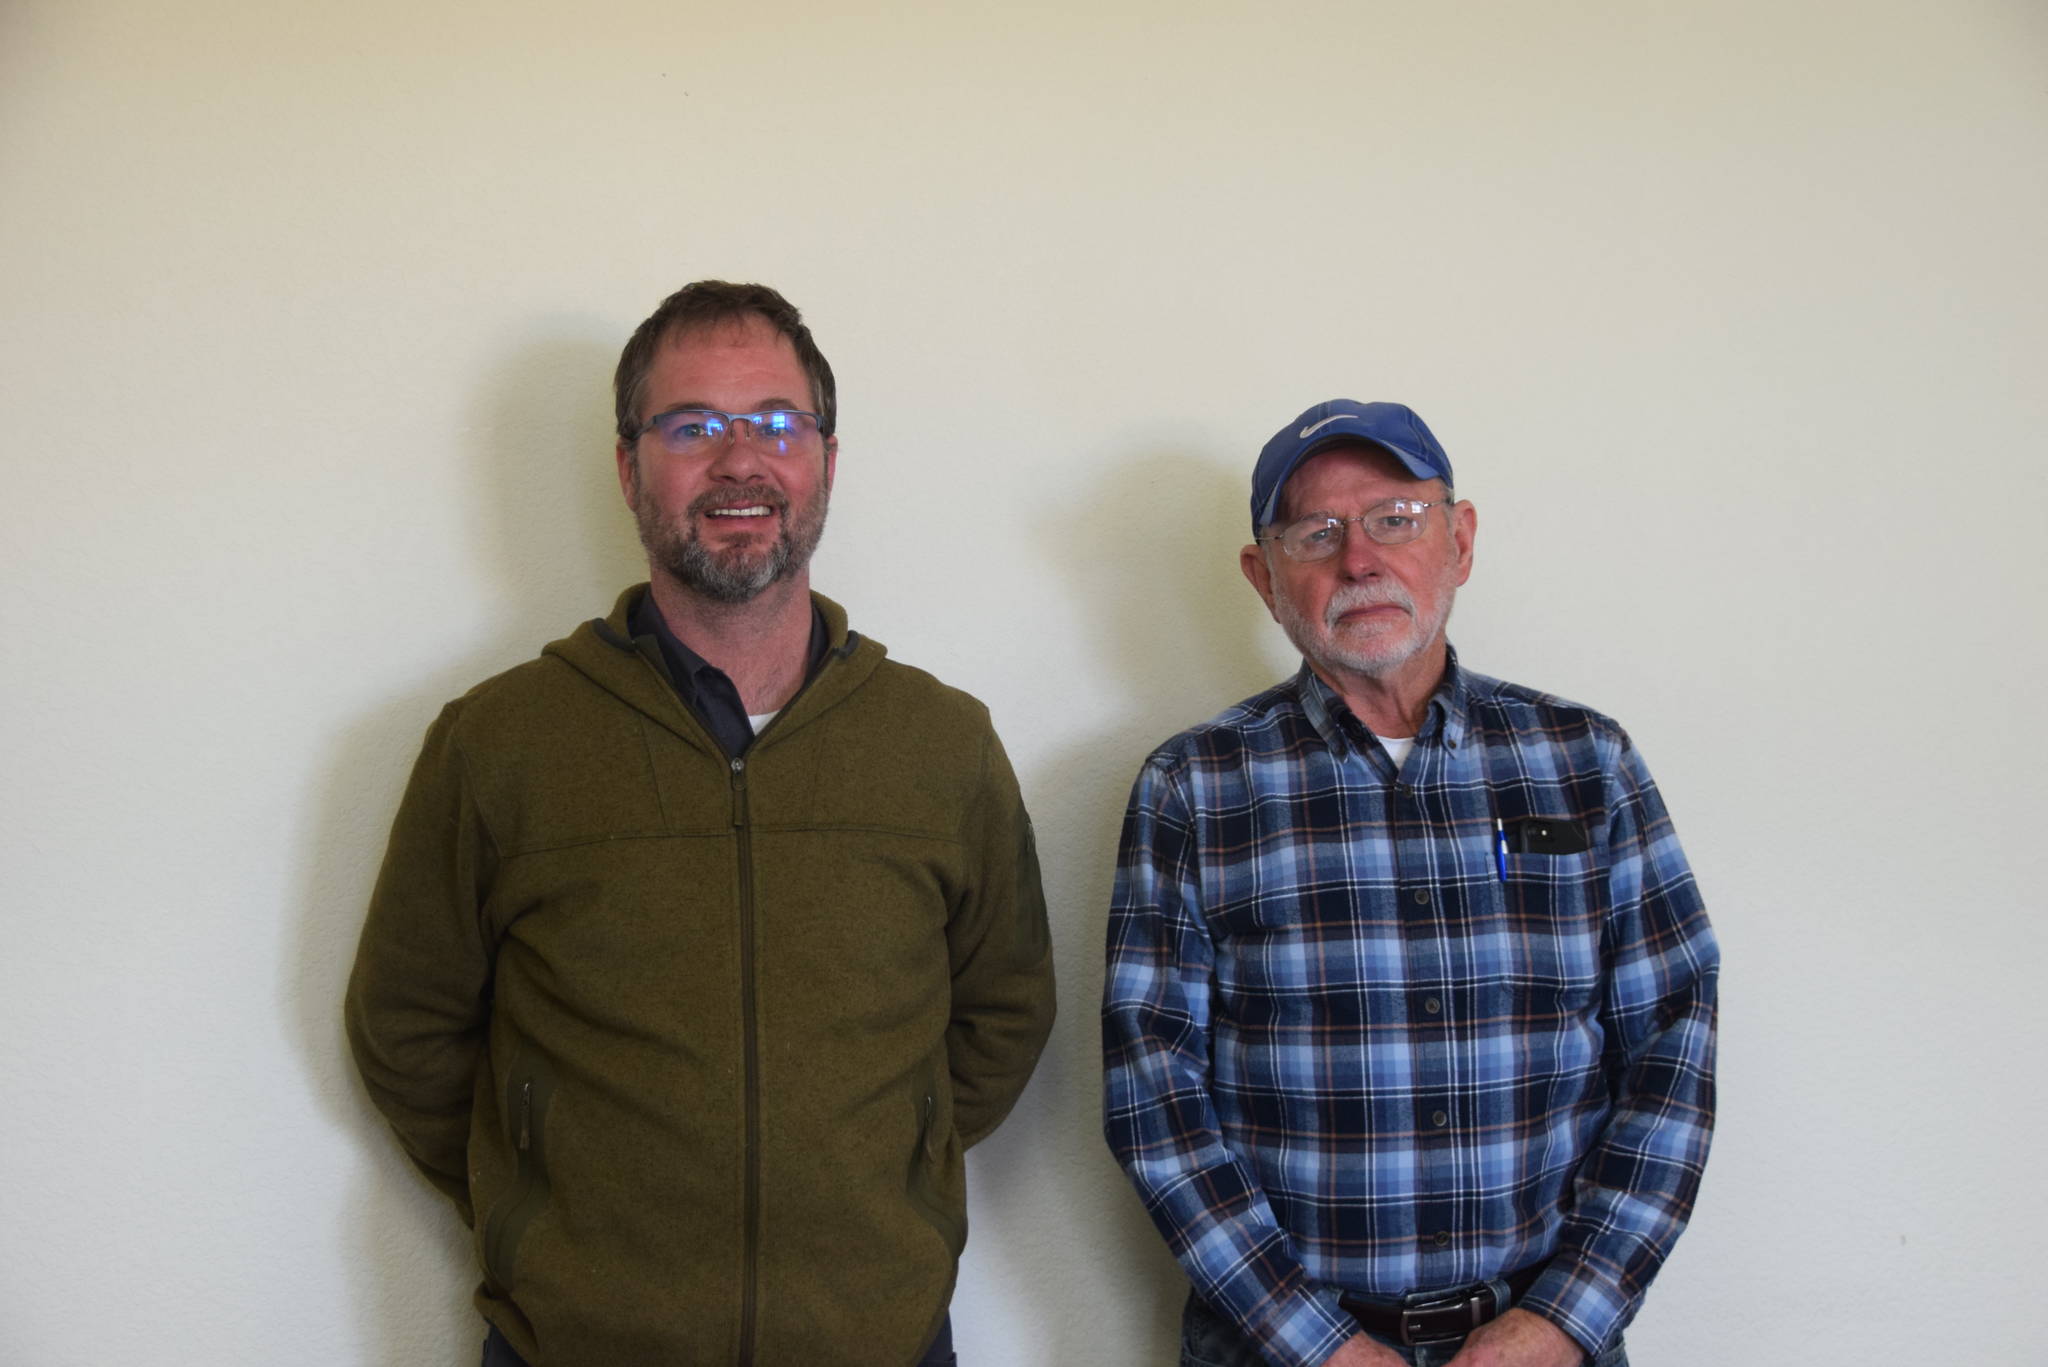 Alyeska Tire Manager Craig Wortham, left, and owner Jerry Wortham, right, pose for a photo in Soldotna, Alaska on April 26, 2019. (Photo by Brian Mazurek/Peninsula Clarion)